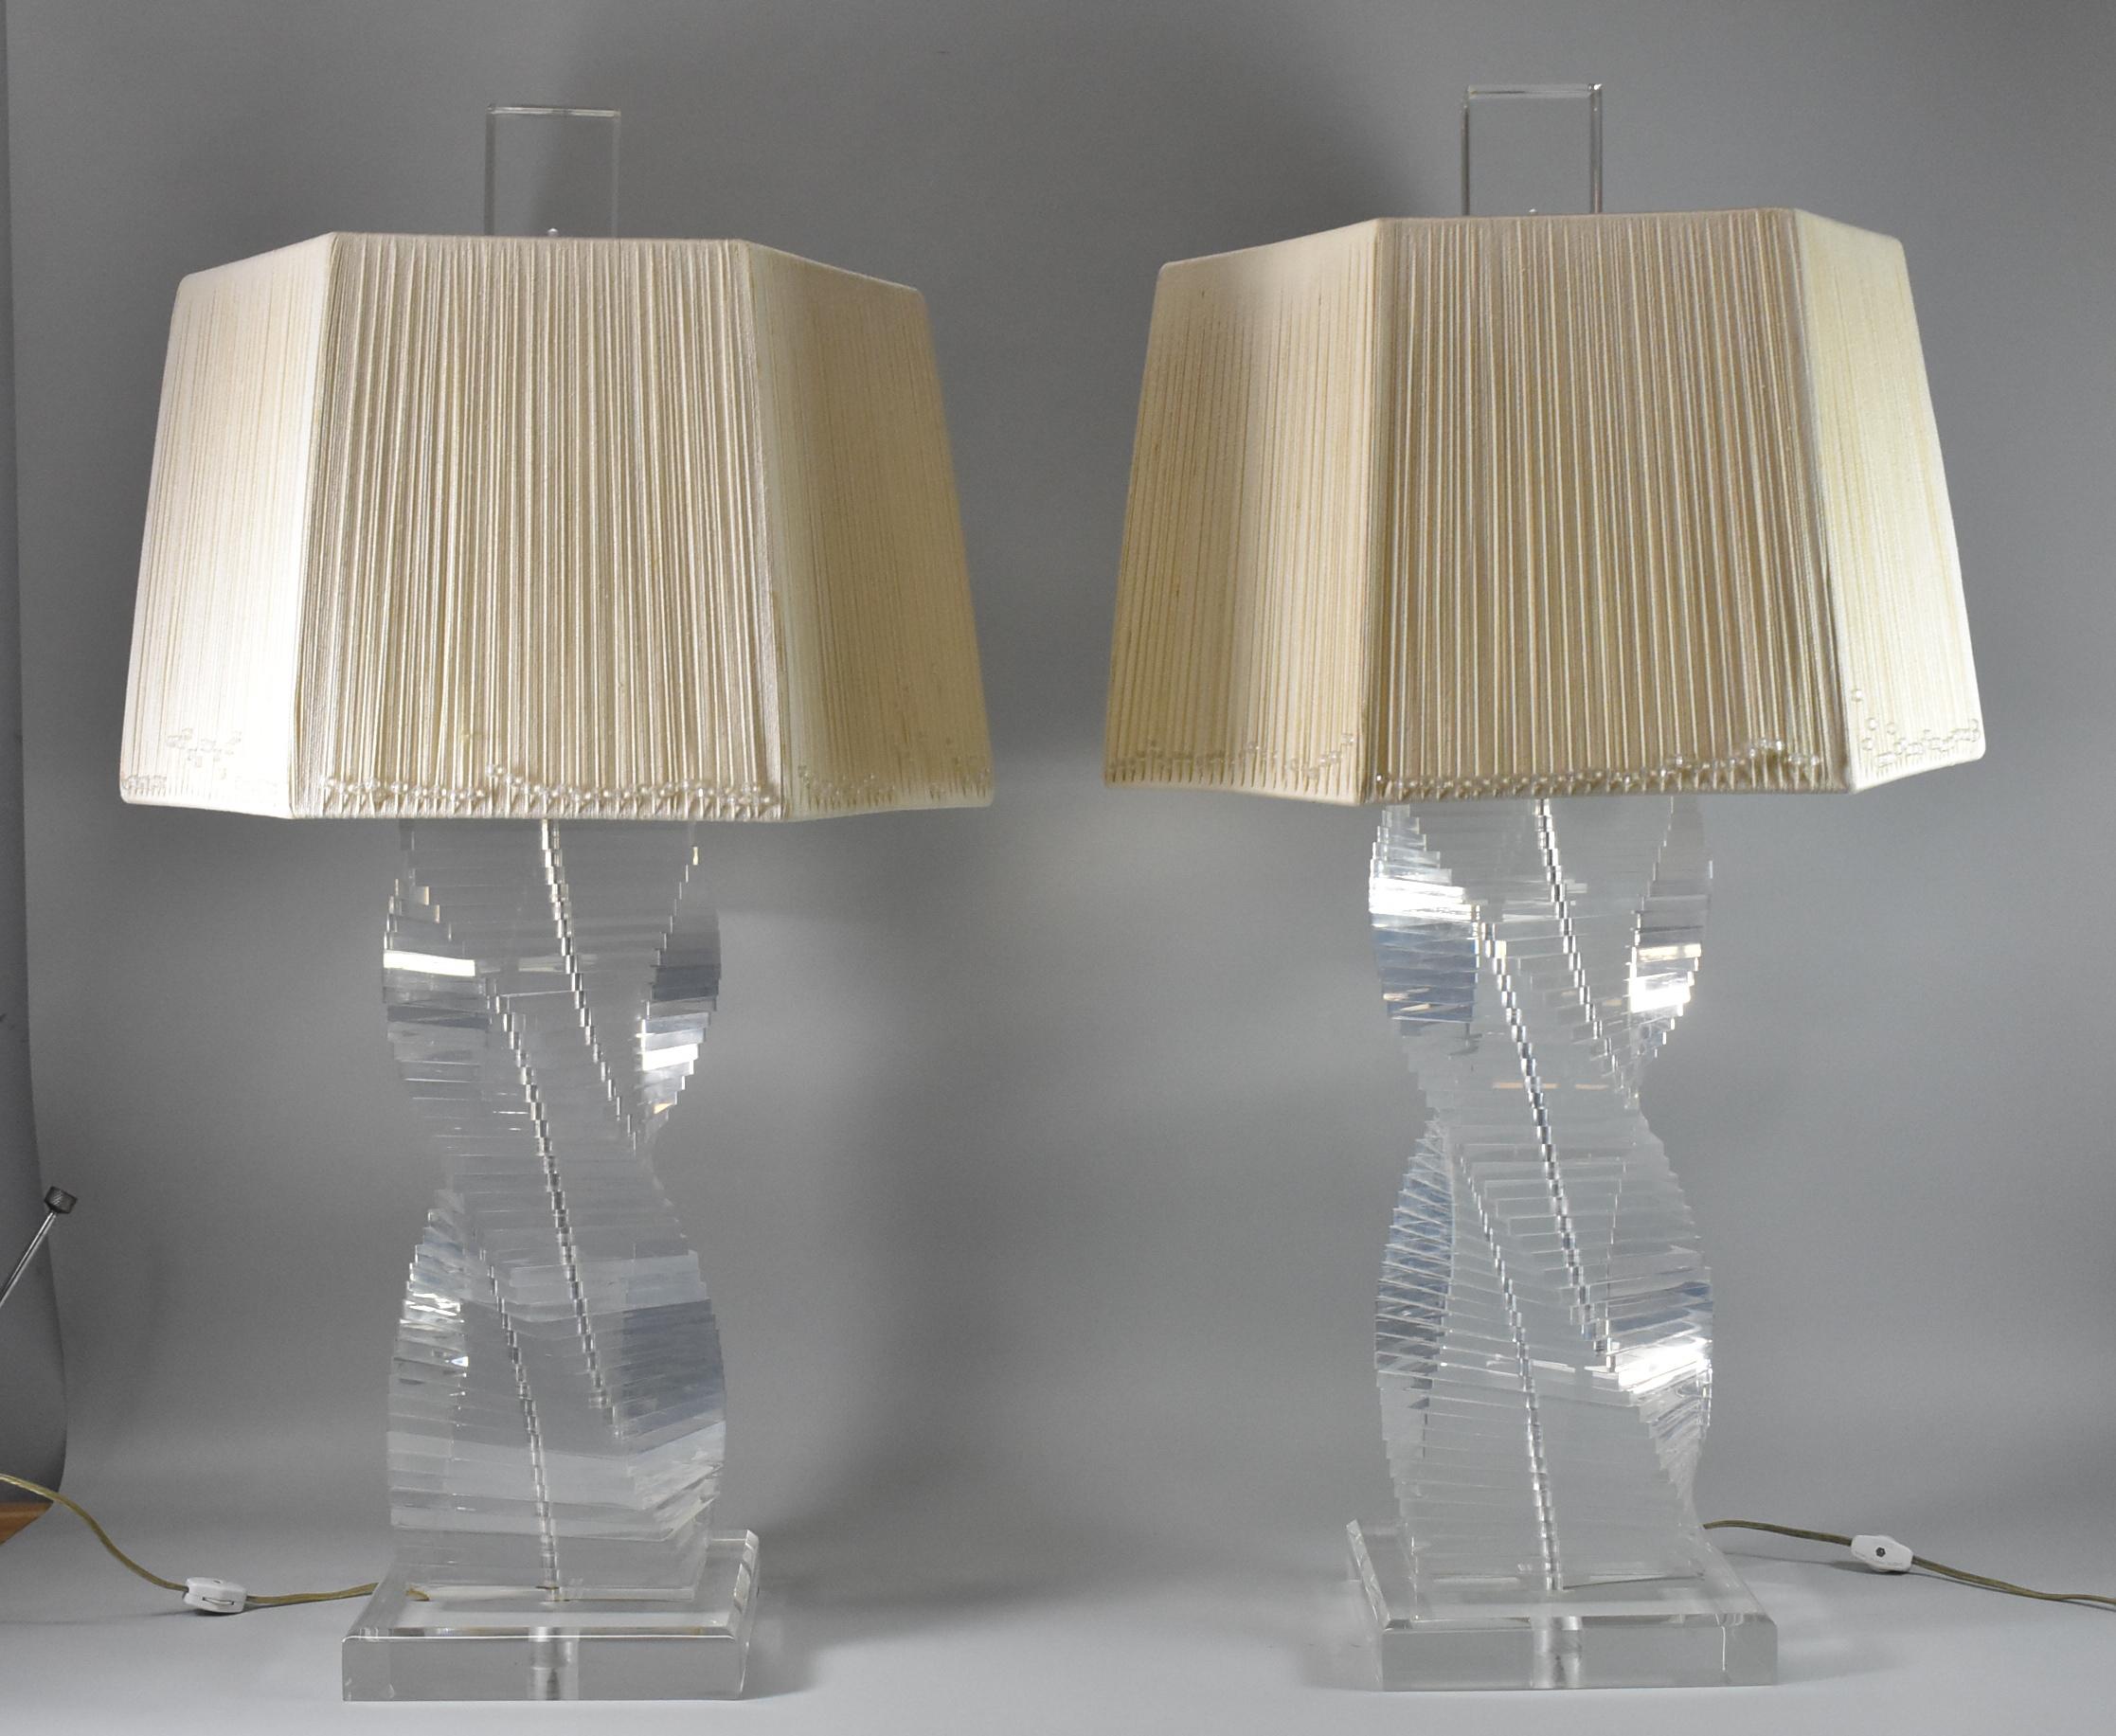 Pair of stacked Lucite helix table lamps with 2 sockets and switch on the cord. The hexagonal shades are covered with unique slim cords with clear beads that slide up and down on the cords. 32